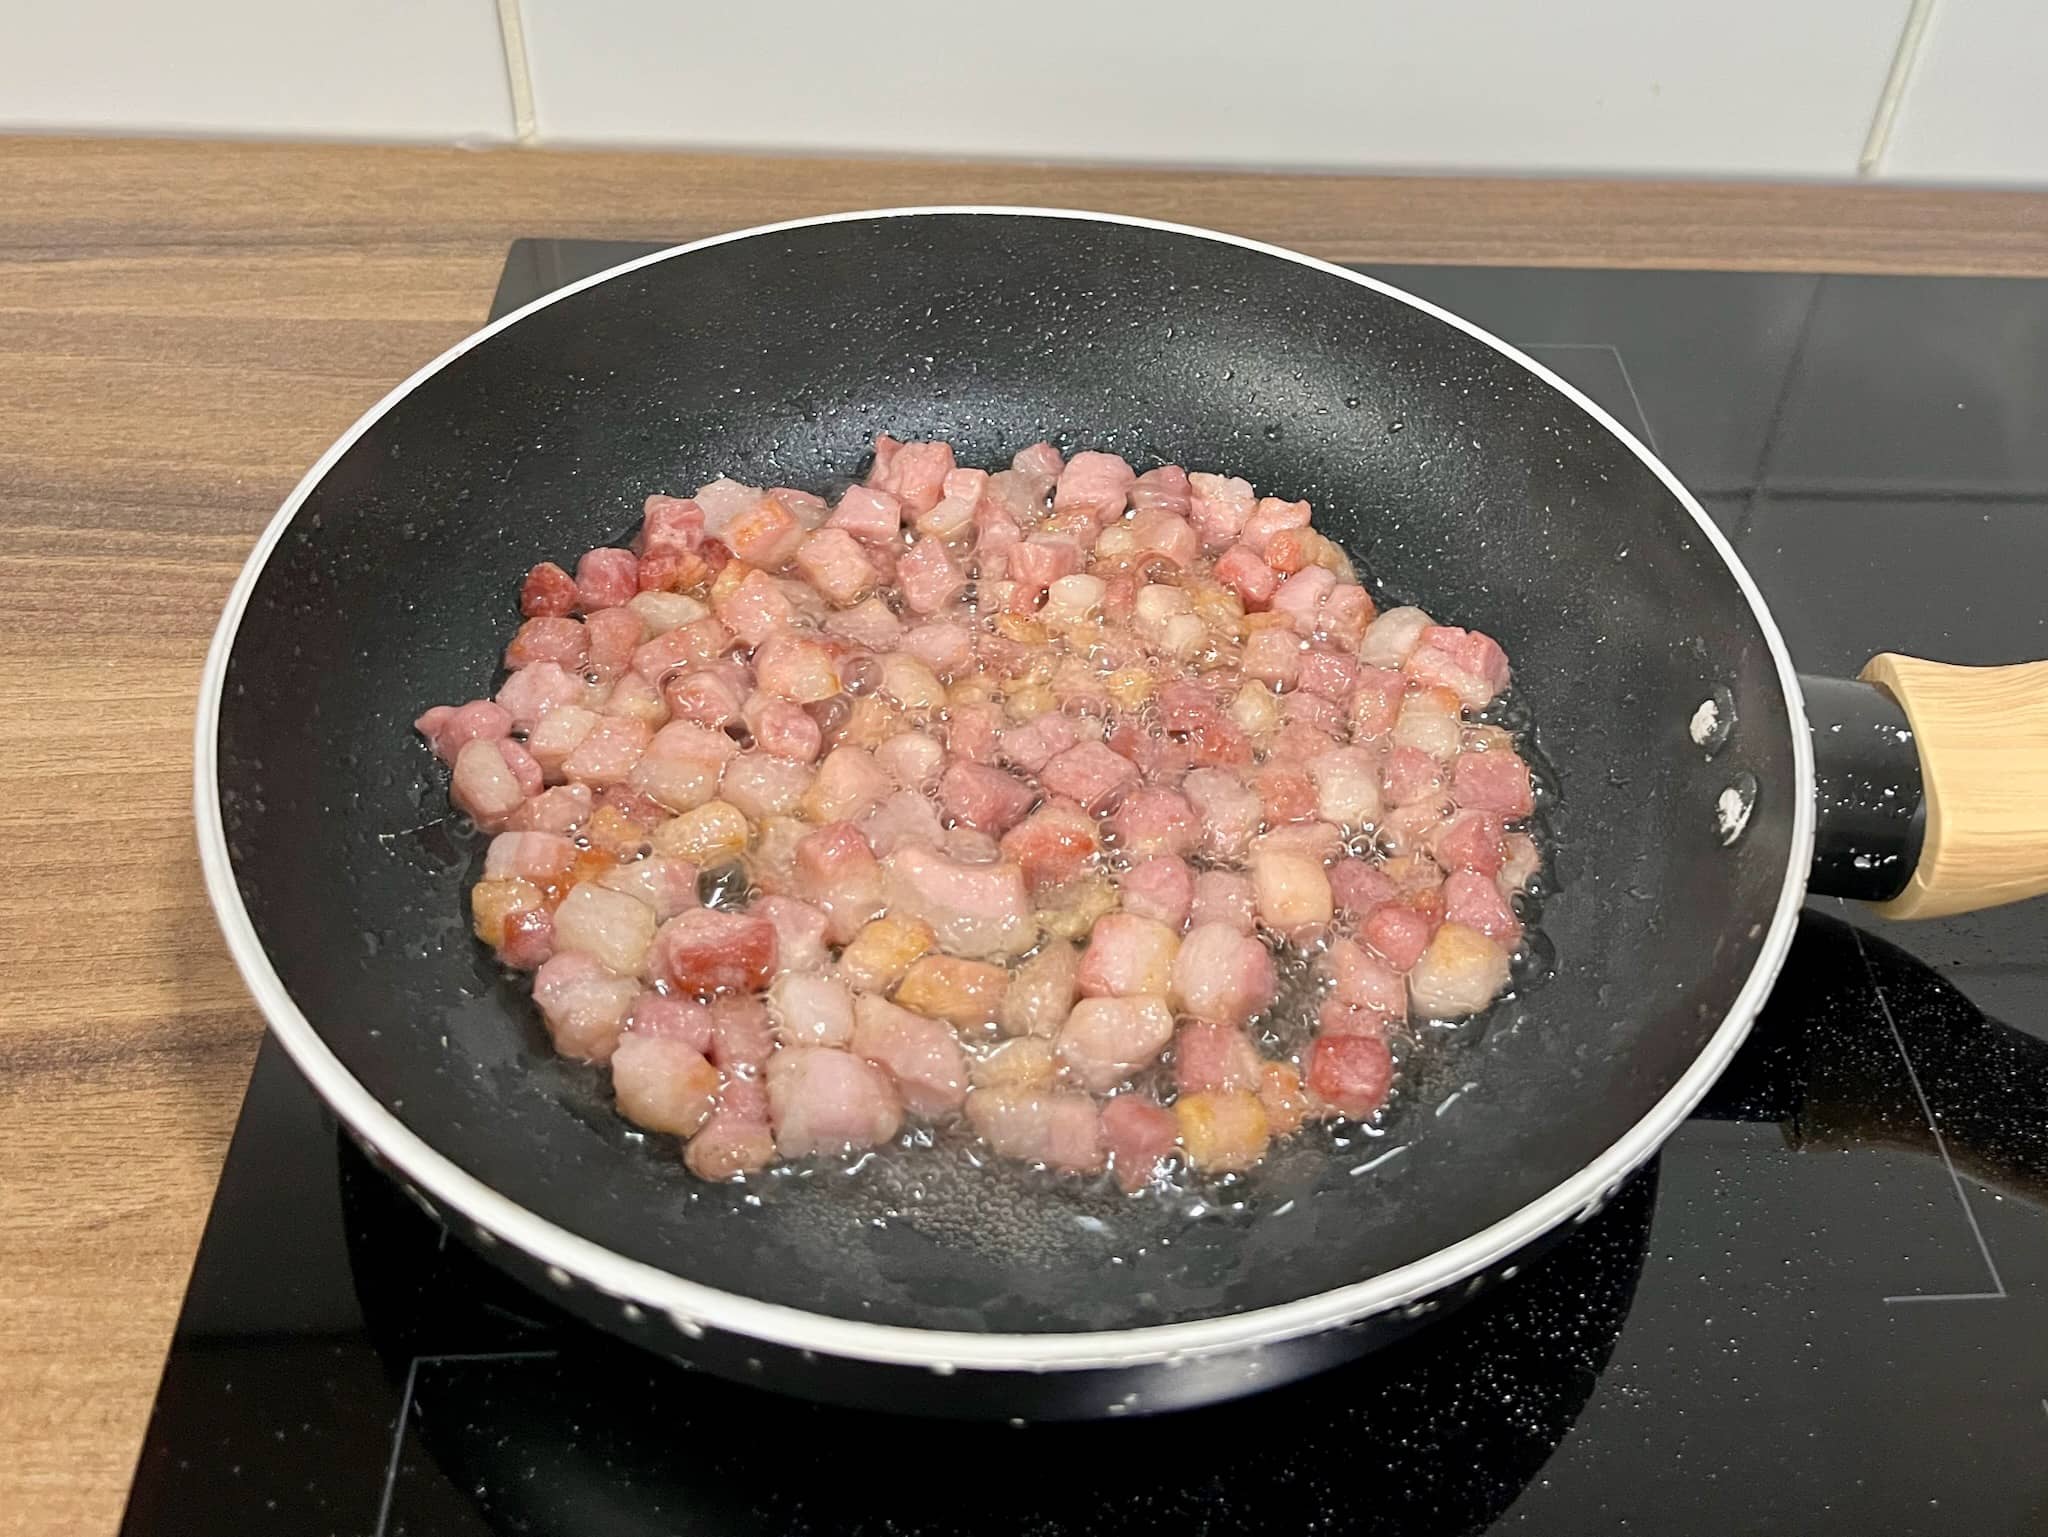 Fried smoked pancetta dice in a pan